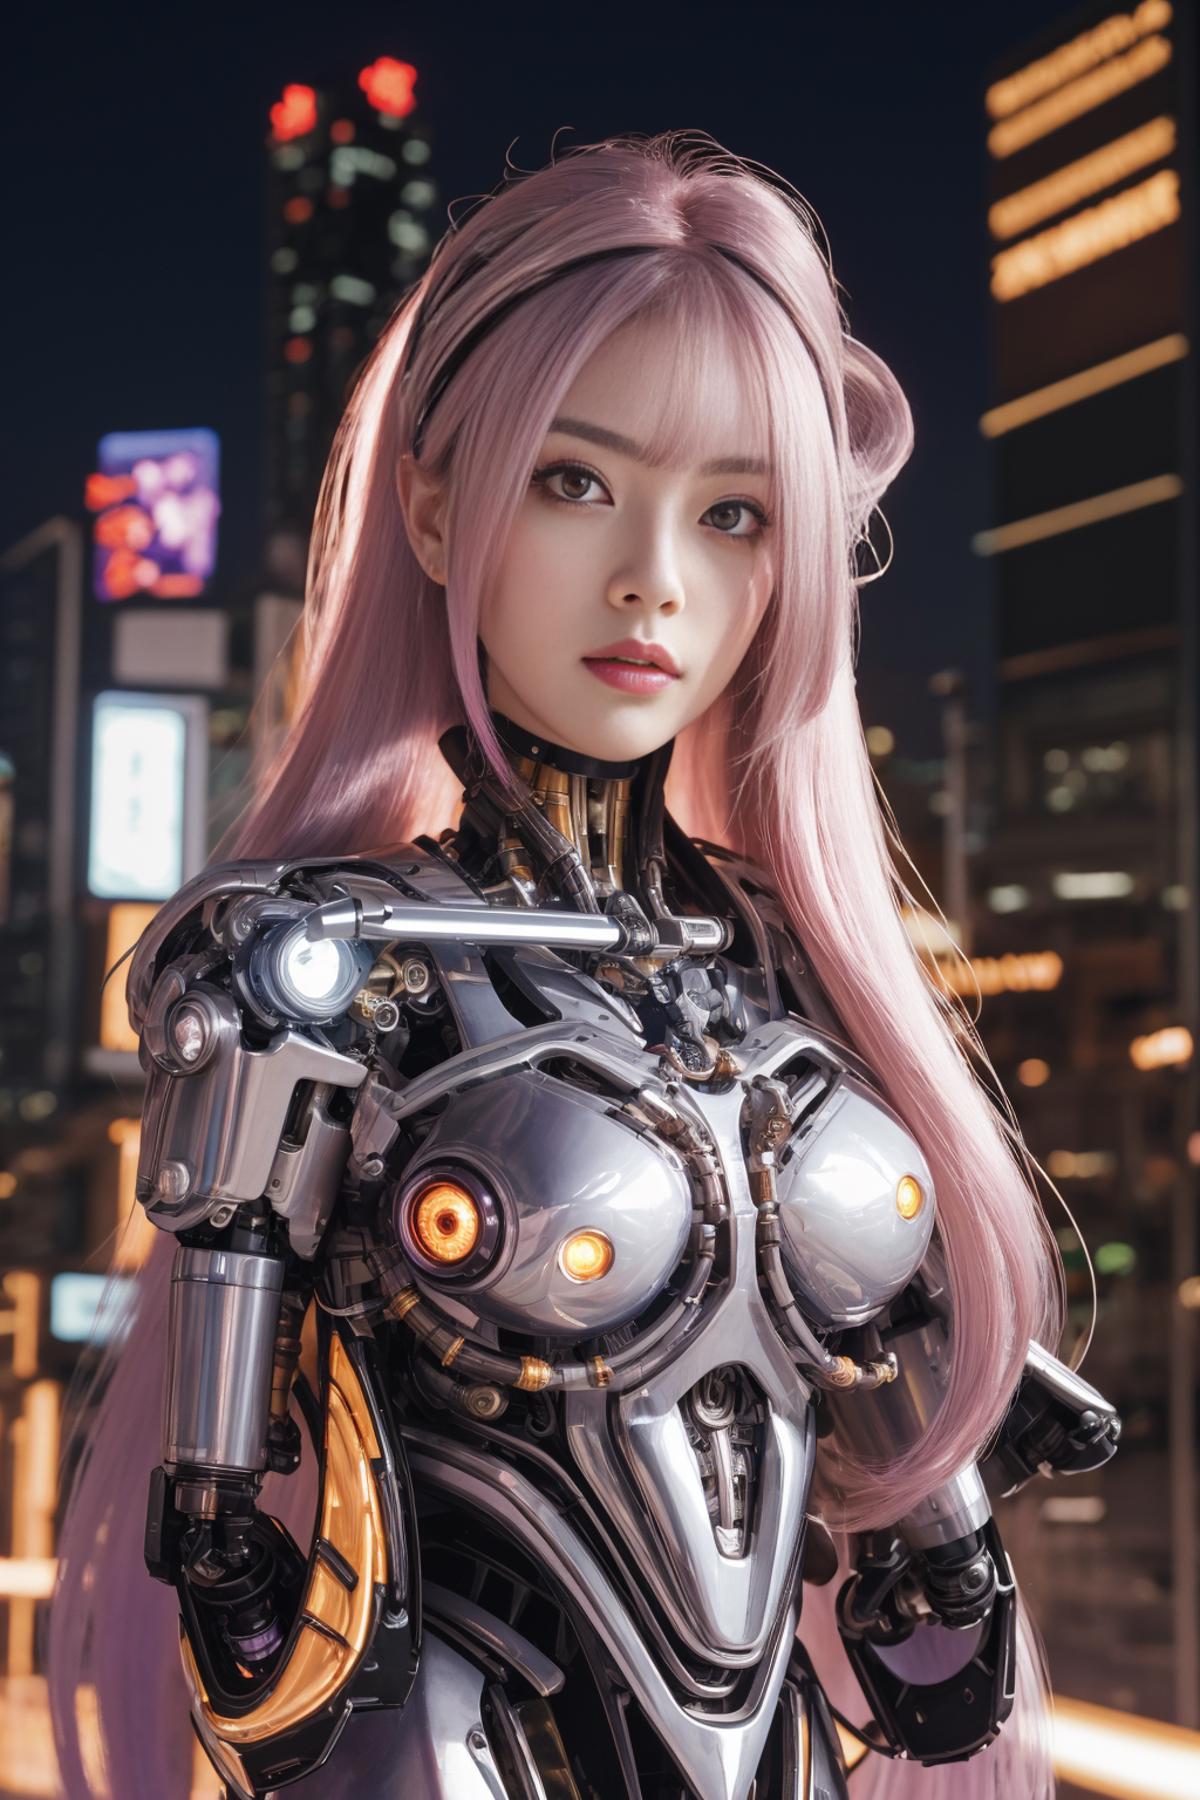 AI model image by Tykope